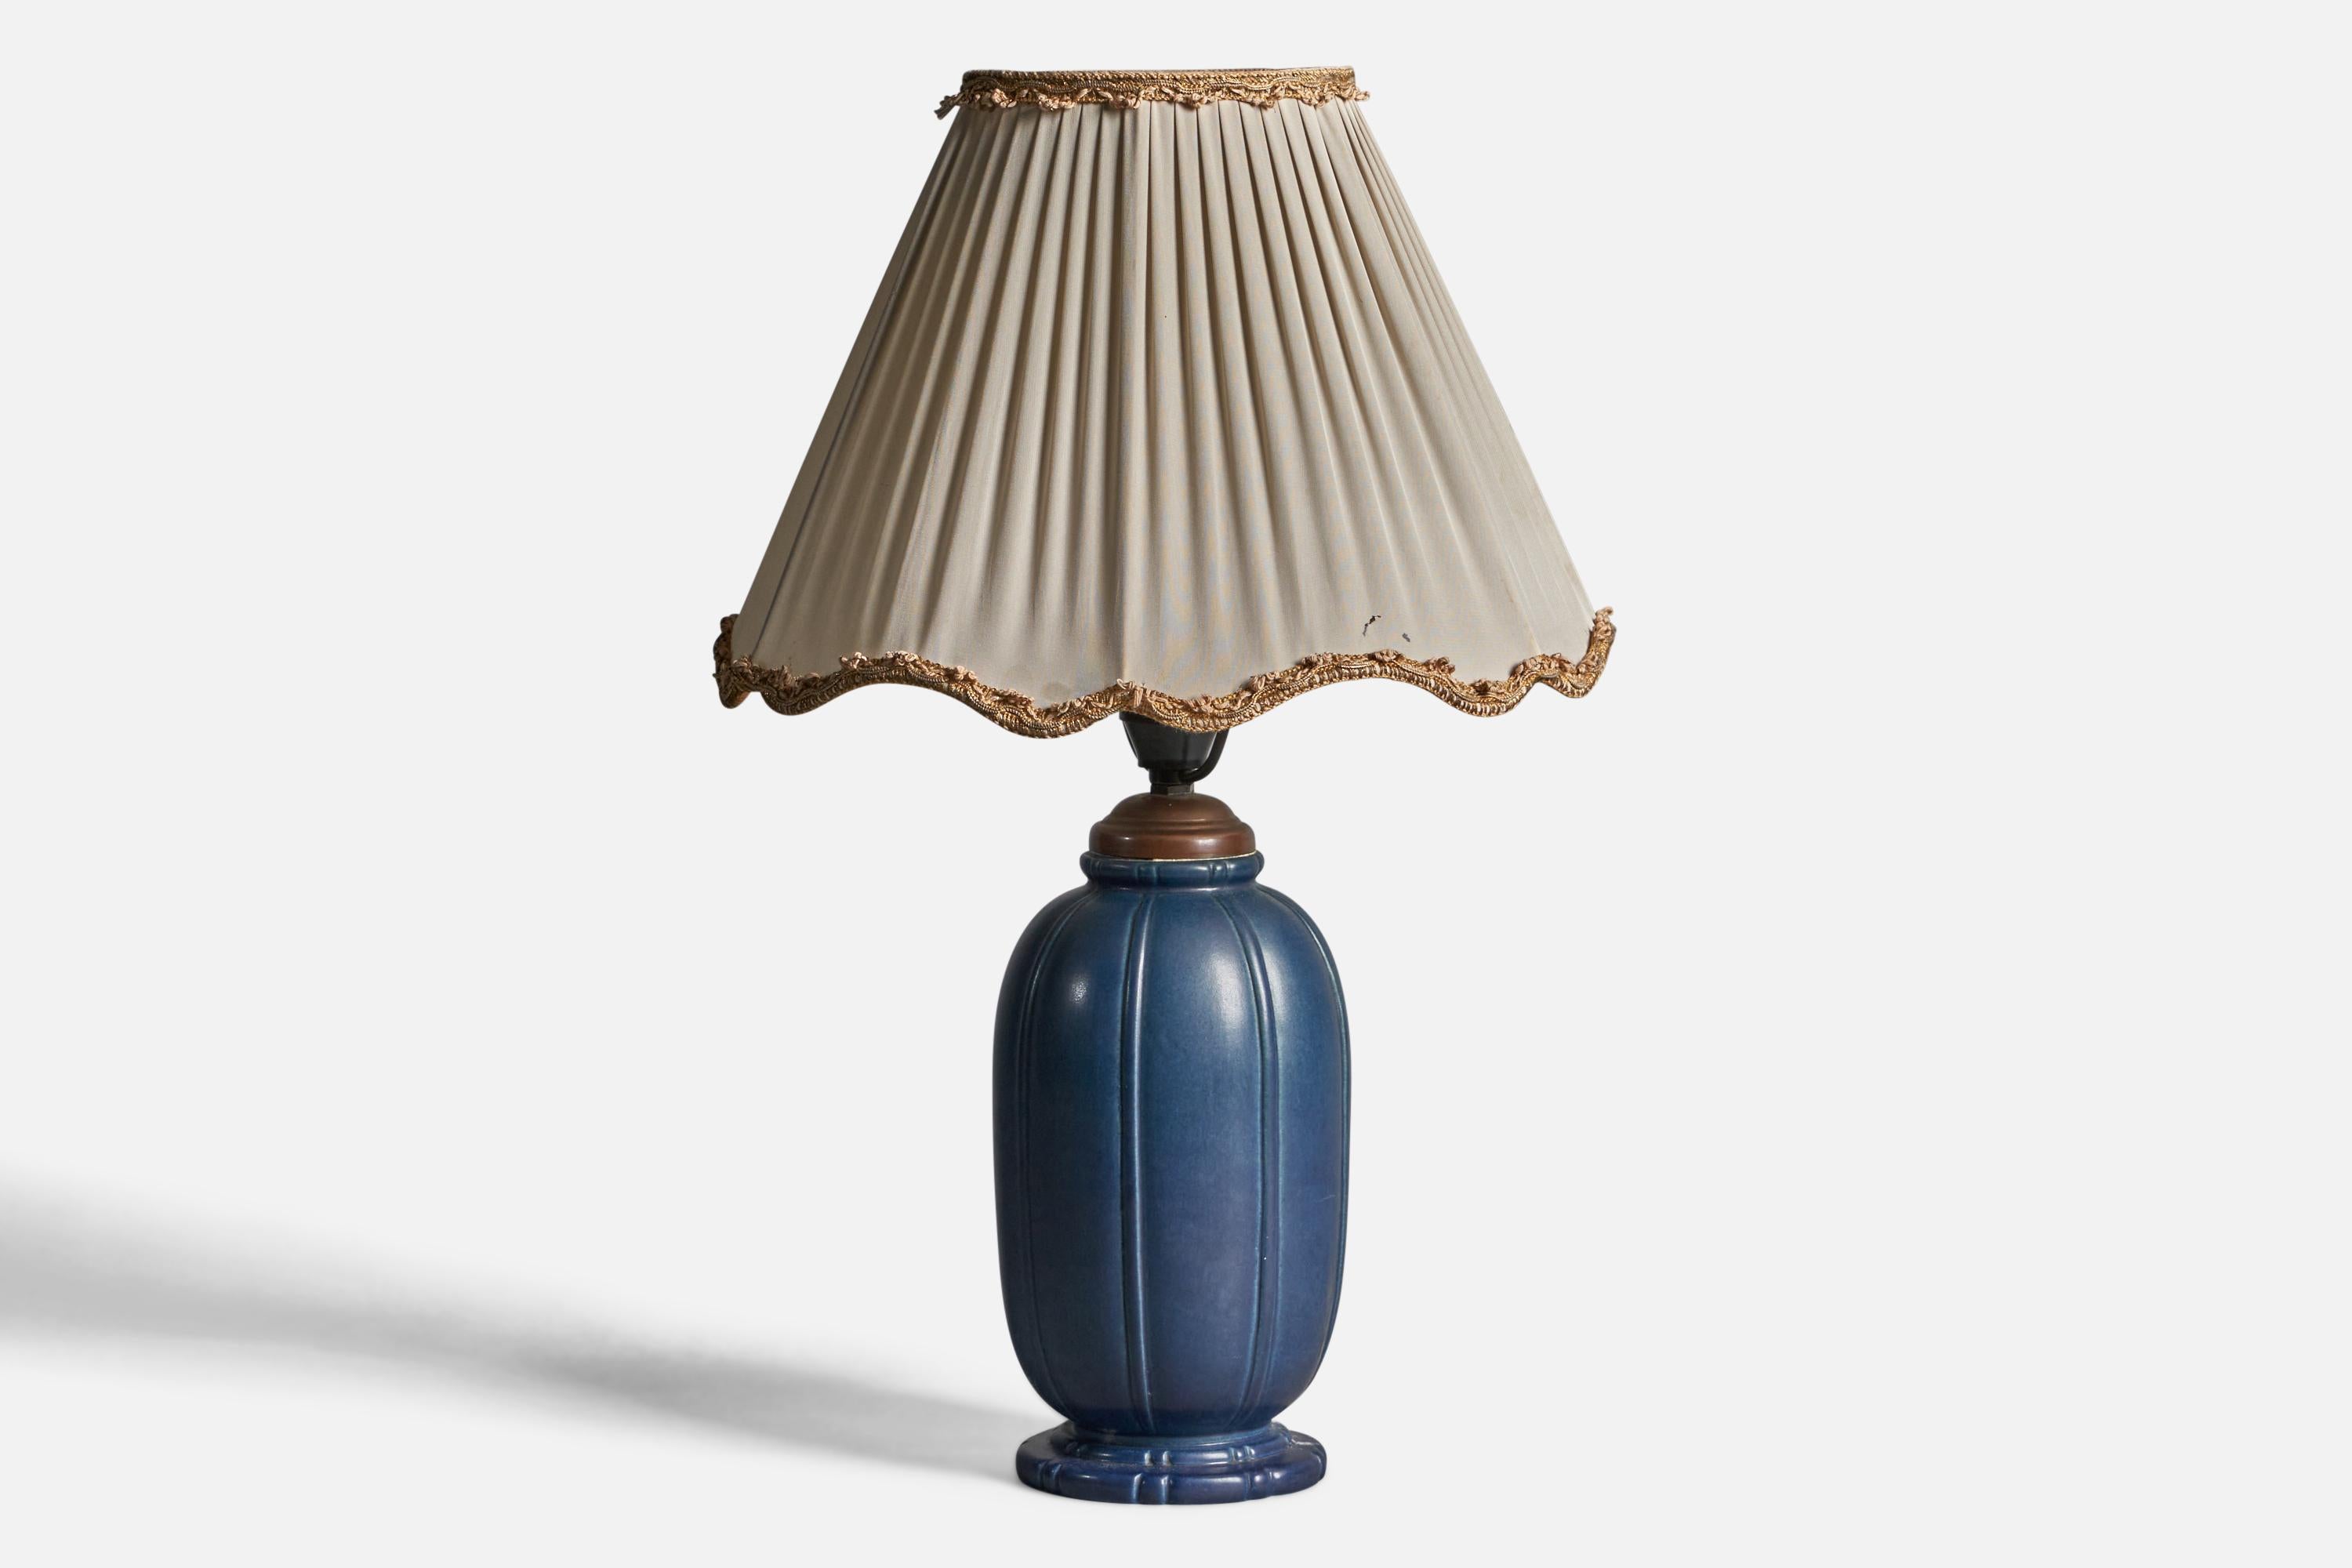 A blue-glazed stoneware, brass and beige fabric table lamp, designed and produced by Peter Ipsens Enke, Denmark, 1940s.

Overall Dimensions (inches): 19